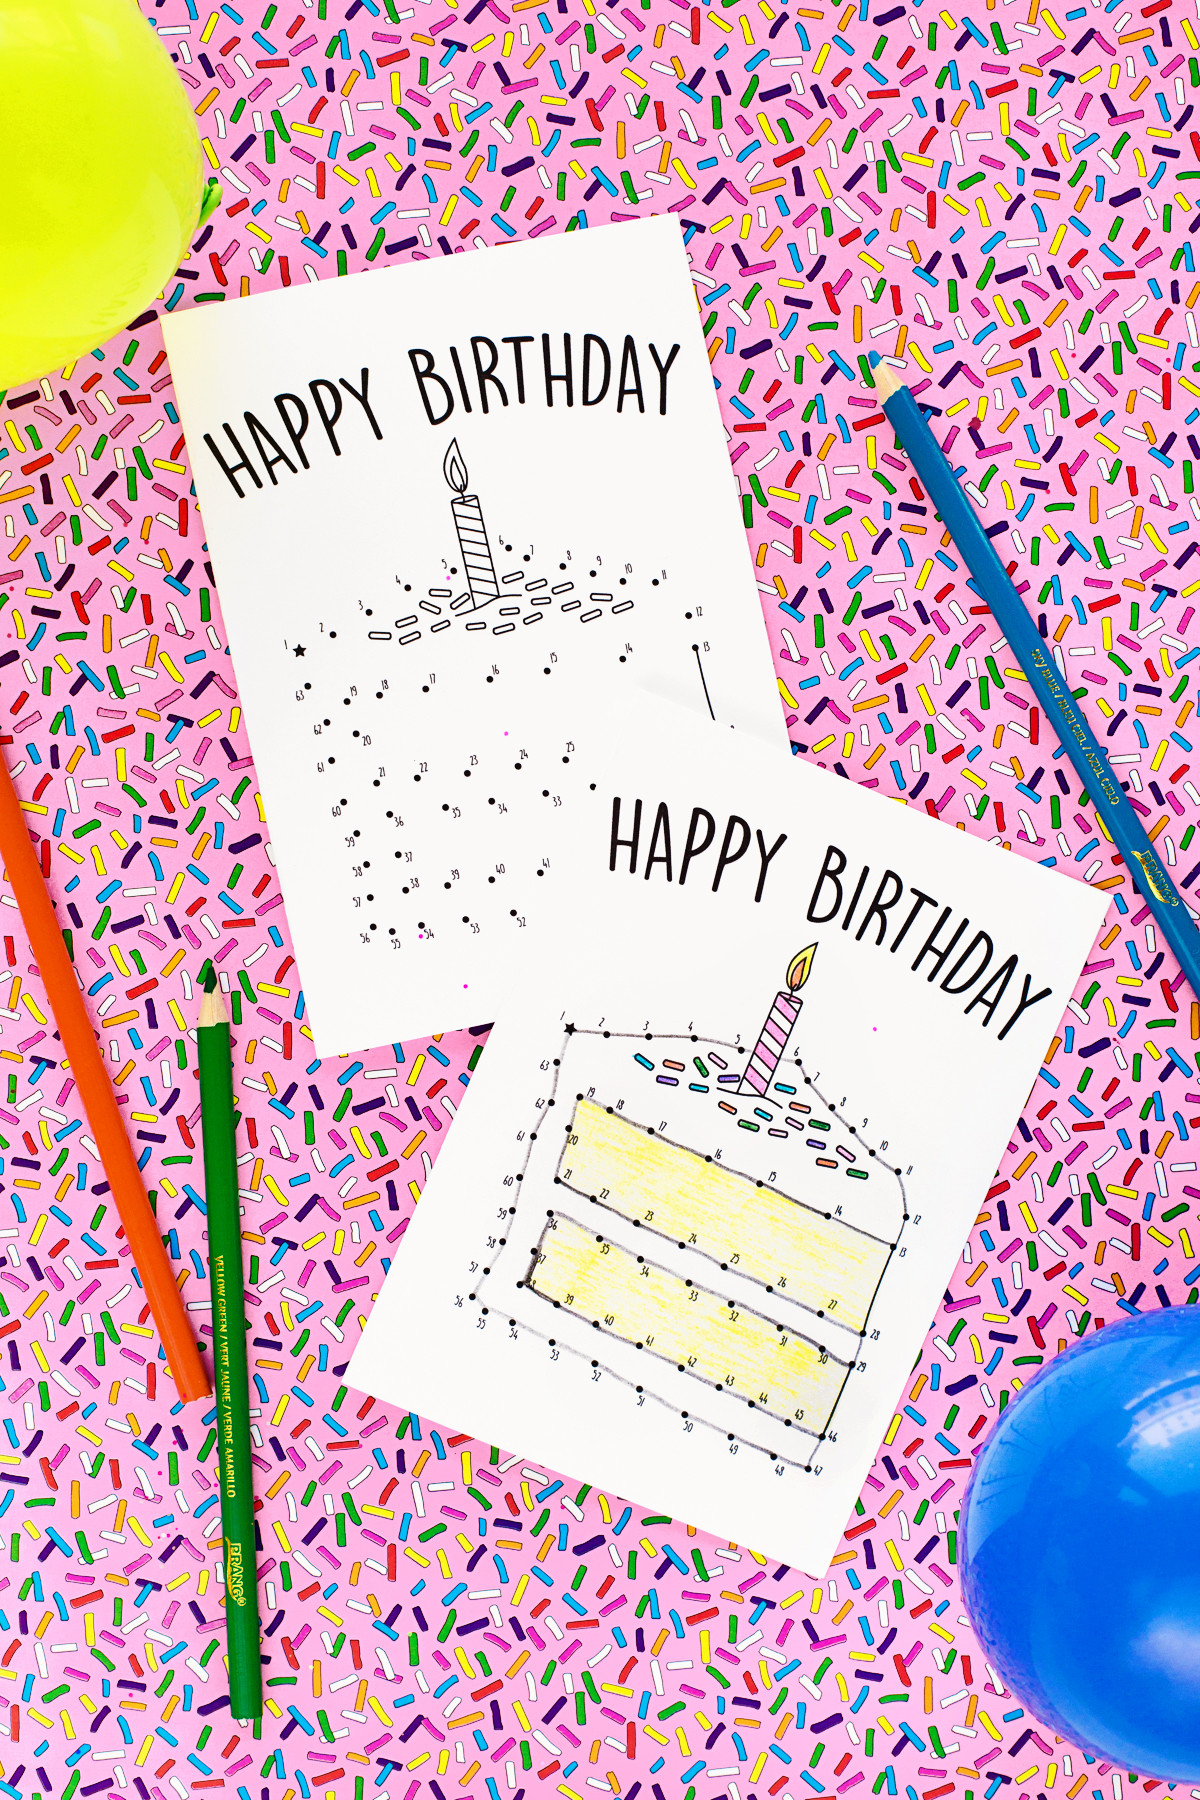 Printable Birthday Cards For Kids
 Free Printable Birthday Cards for Kids Studio DIY